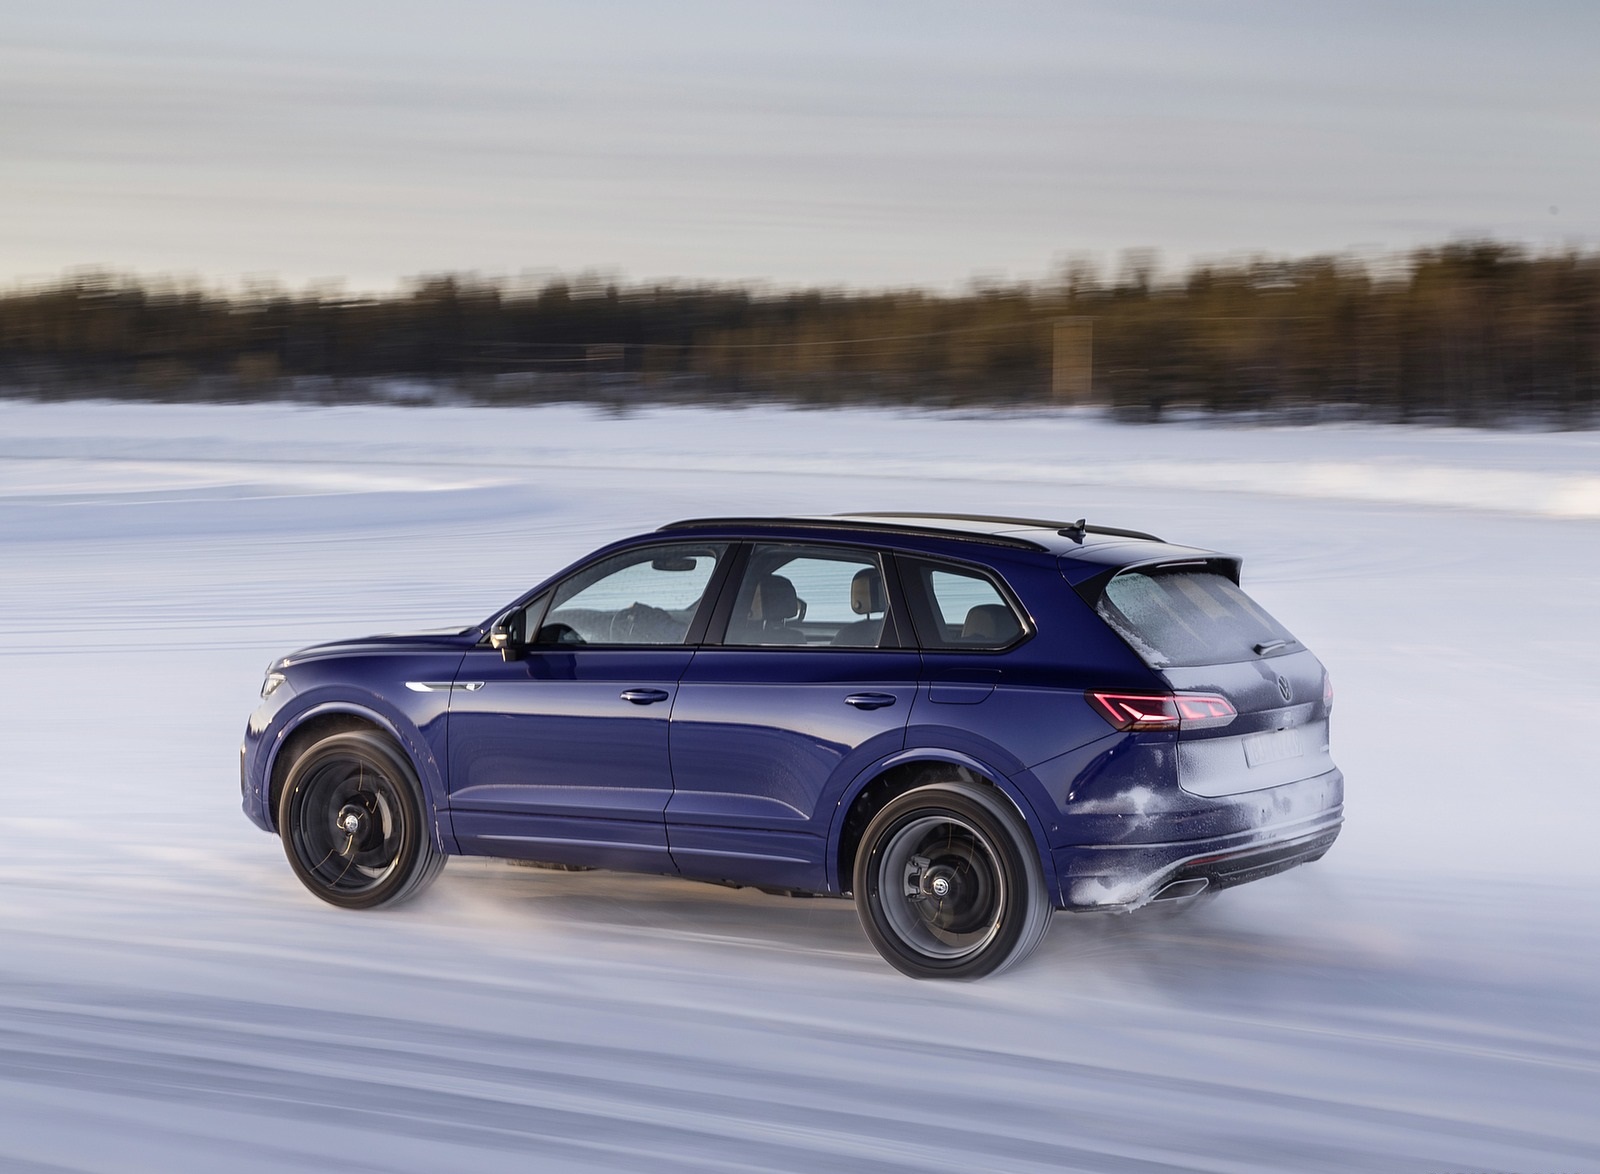 2021 Volkswagen Touareg R Plug-In Hybrid In Snow Rear Three-Quarter Wallpapers #67 of 90